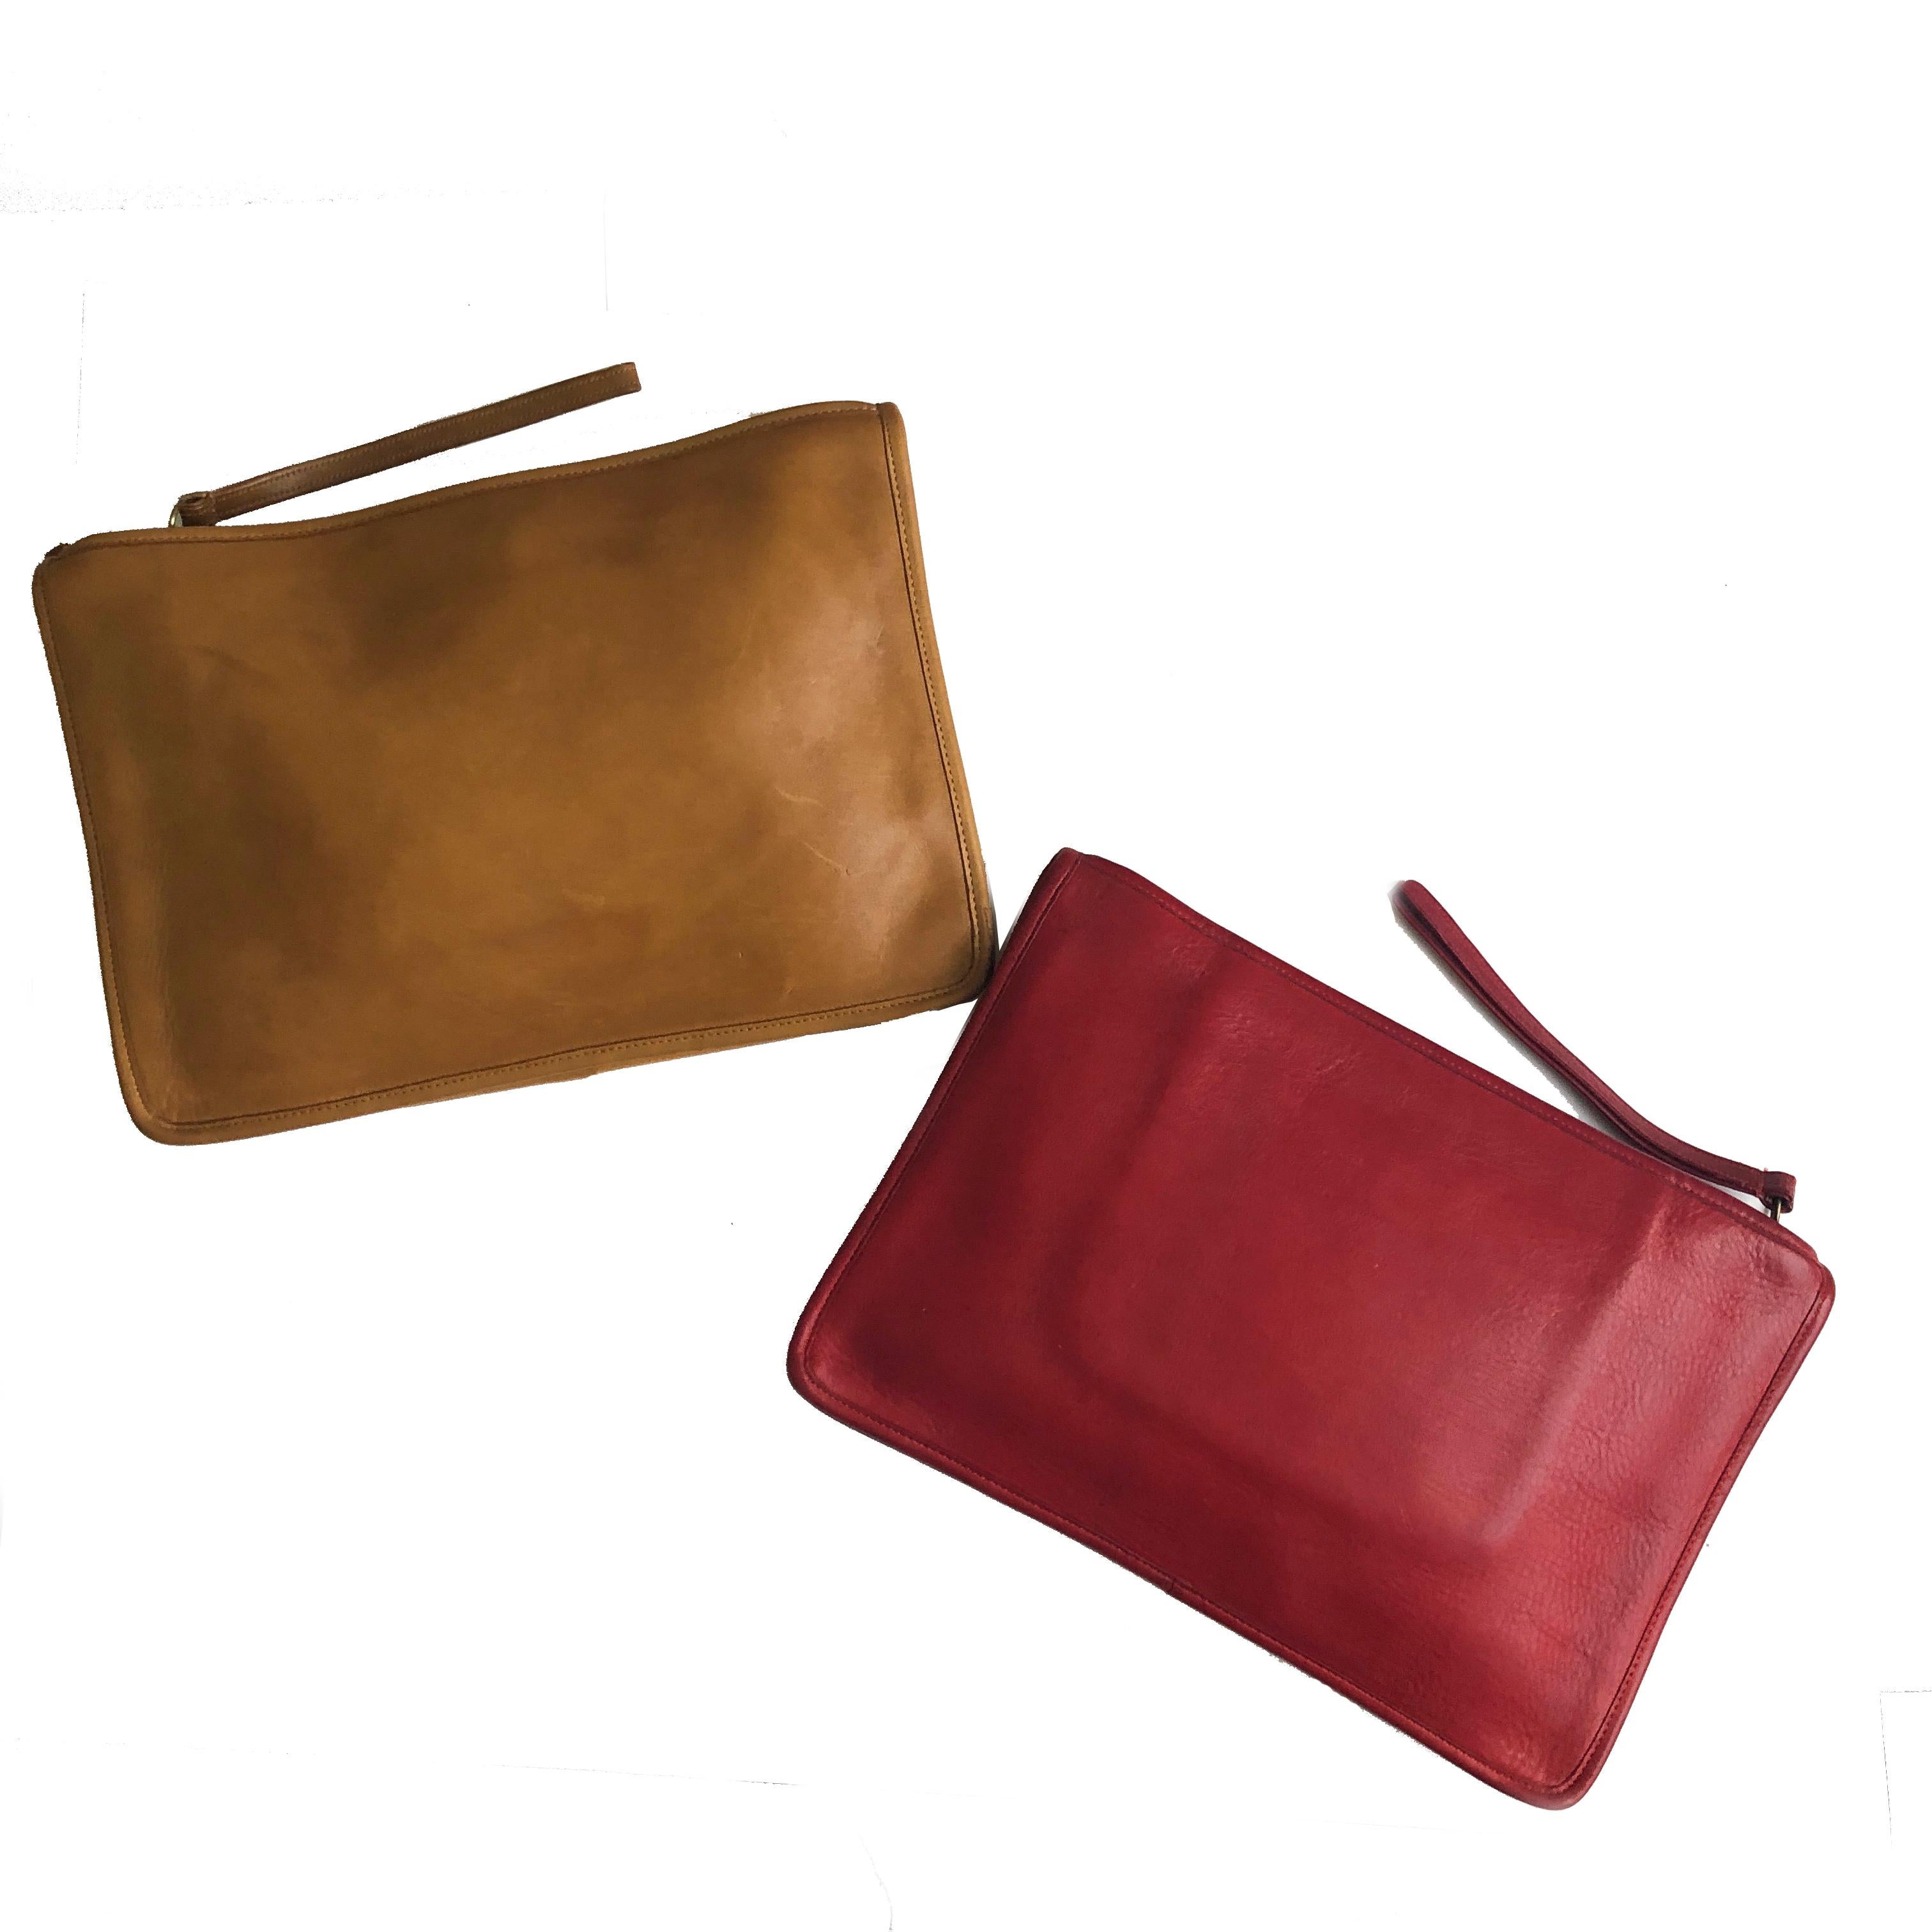 Vintage Bonnie Cashin for Coach Large Slim Clutch Bag Red Leather NYC 70s  1